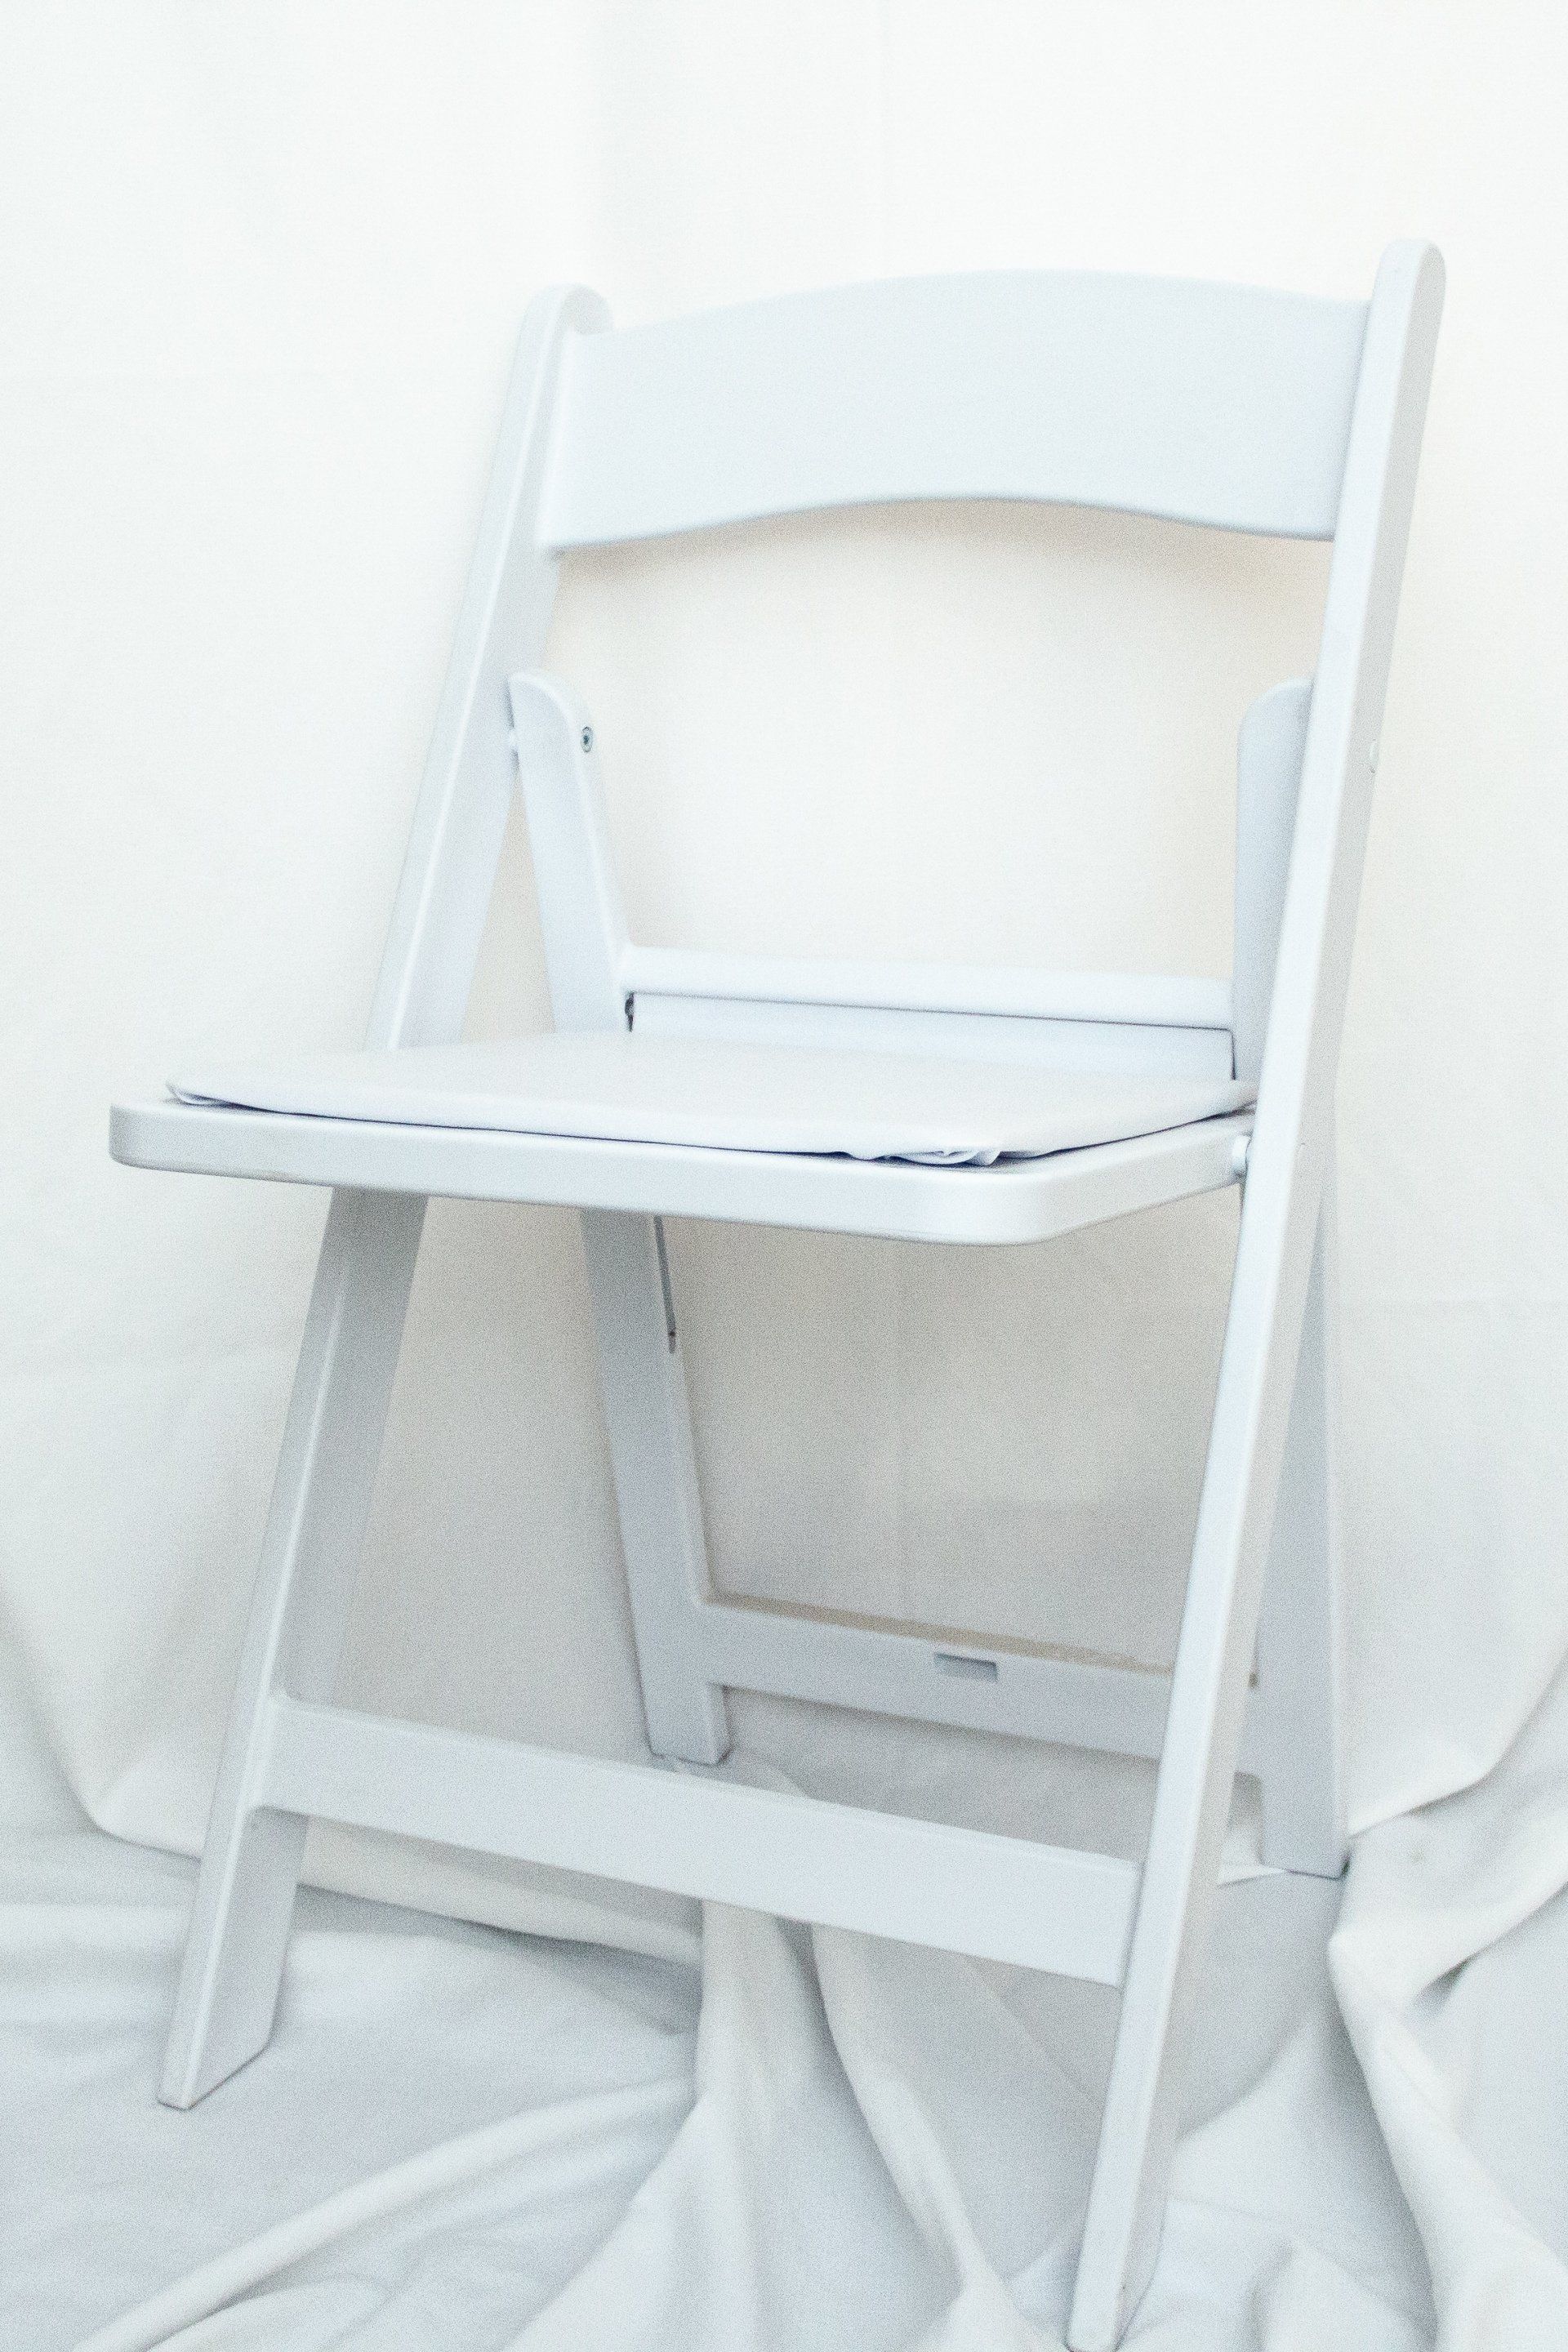 A white folding chair is sitting on a white cloth